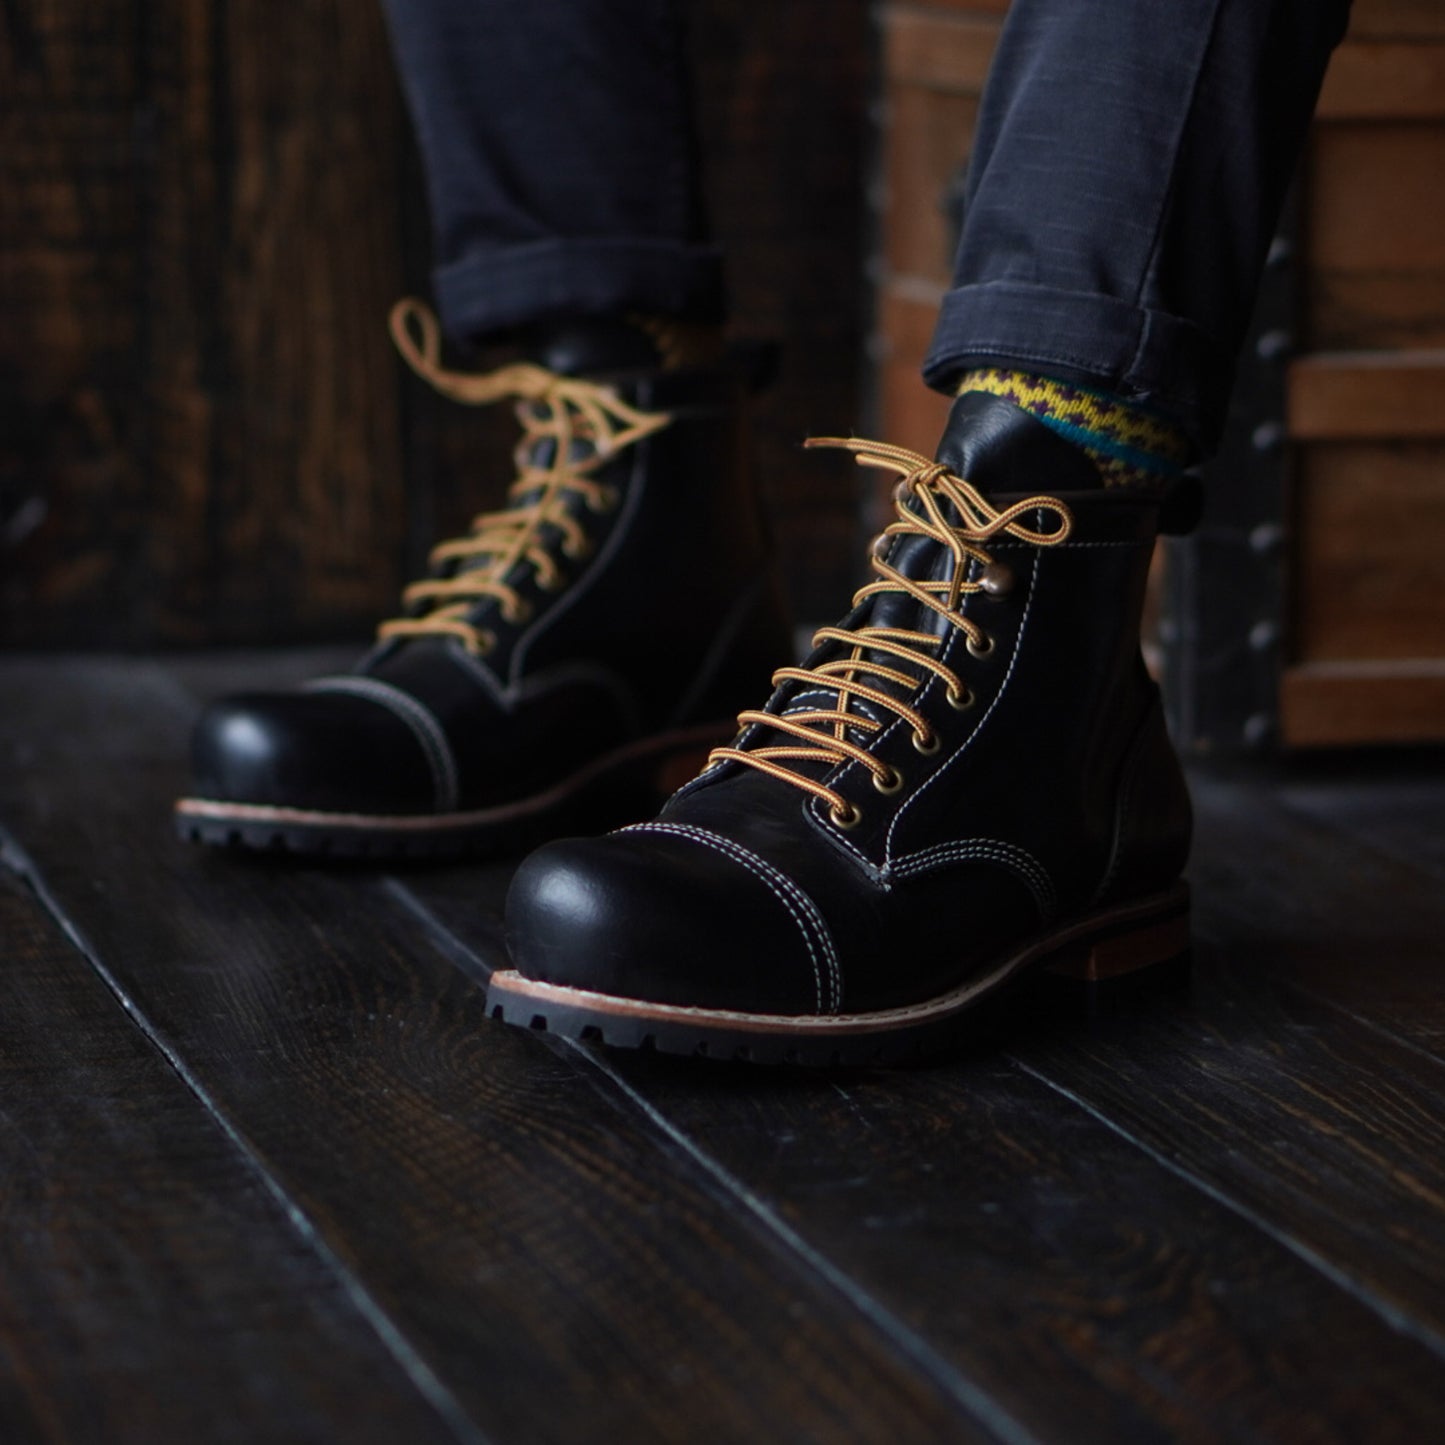 Ranger Boots (Raven Black) Goodyear Welted